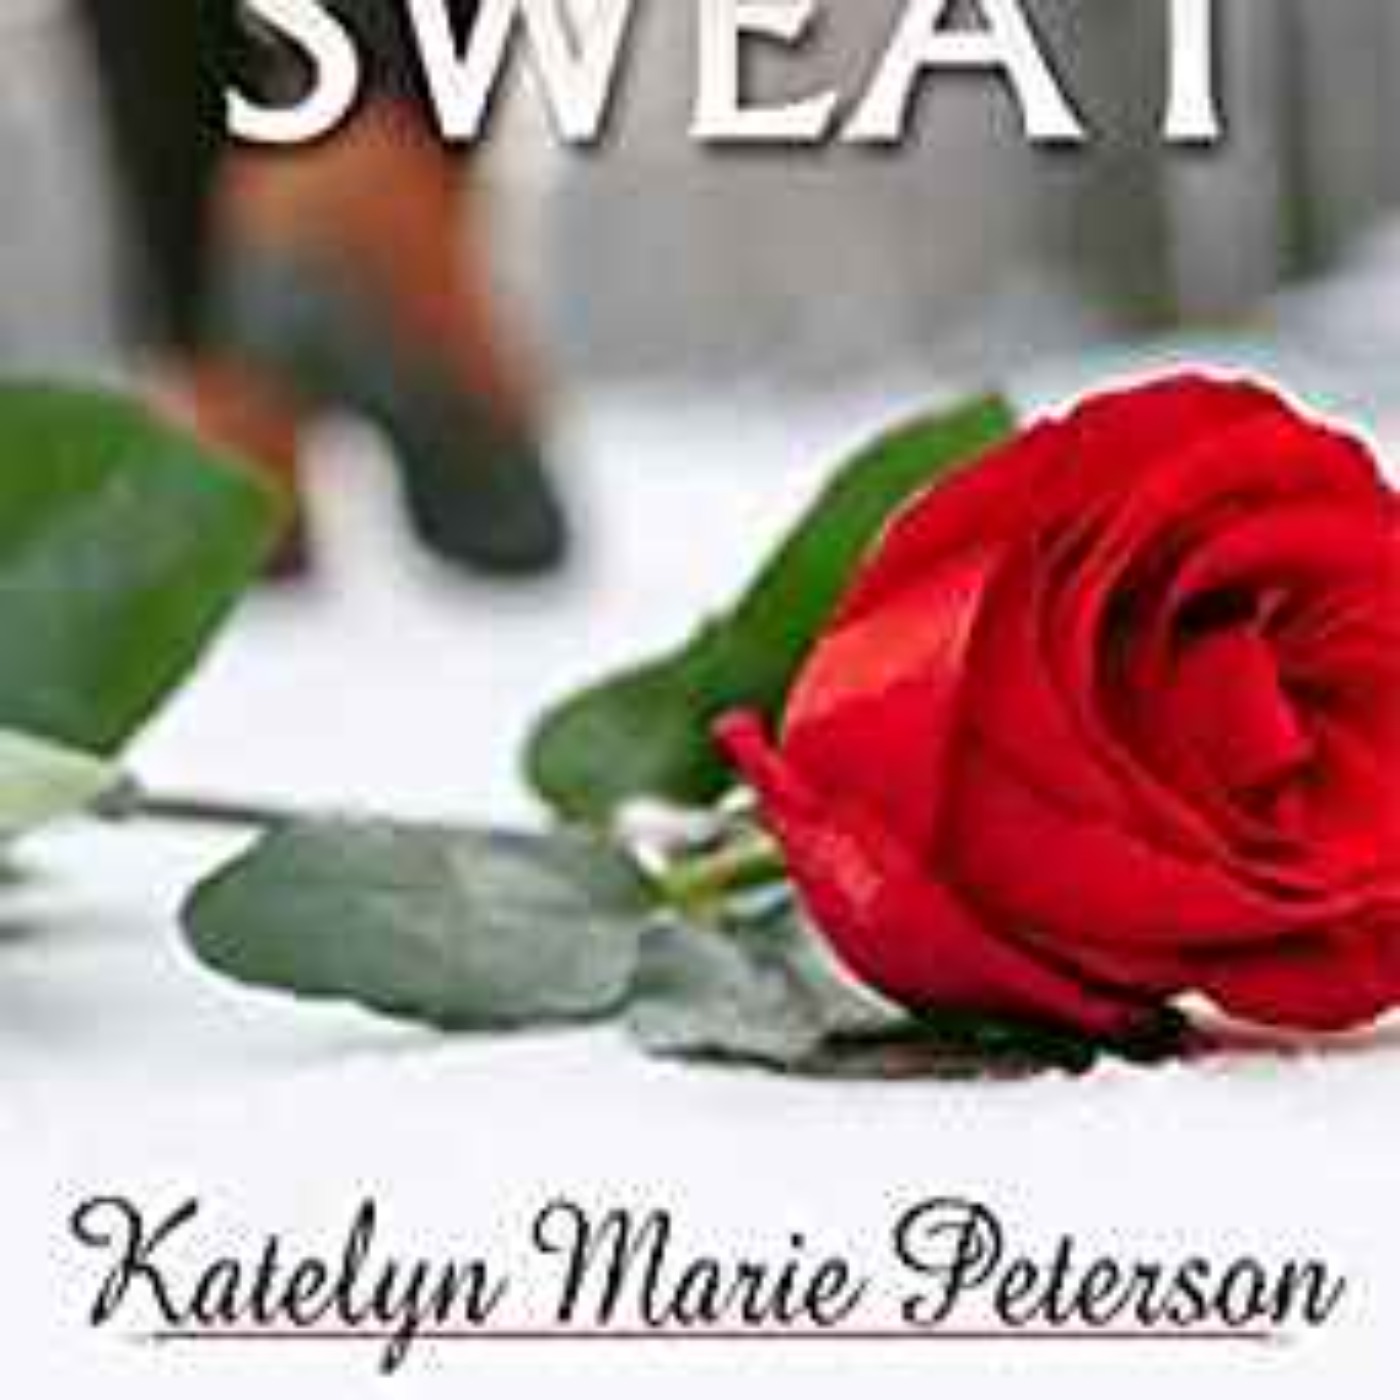 Katelyn Marie Peterson - Cold Sweat